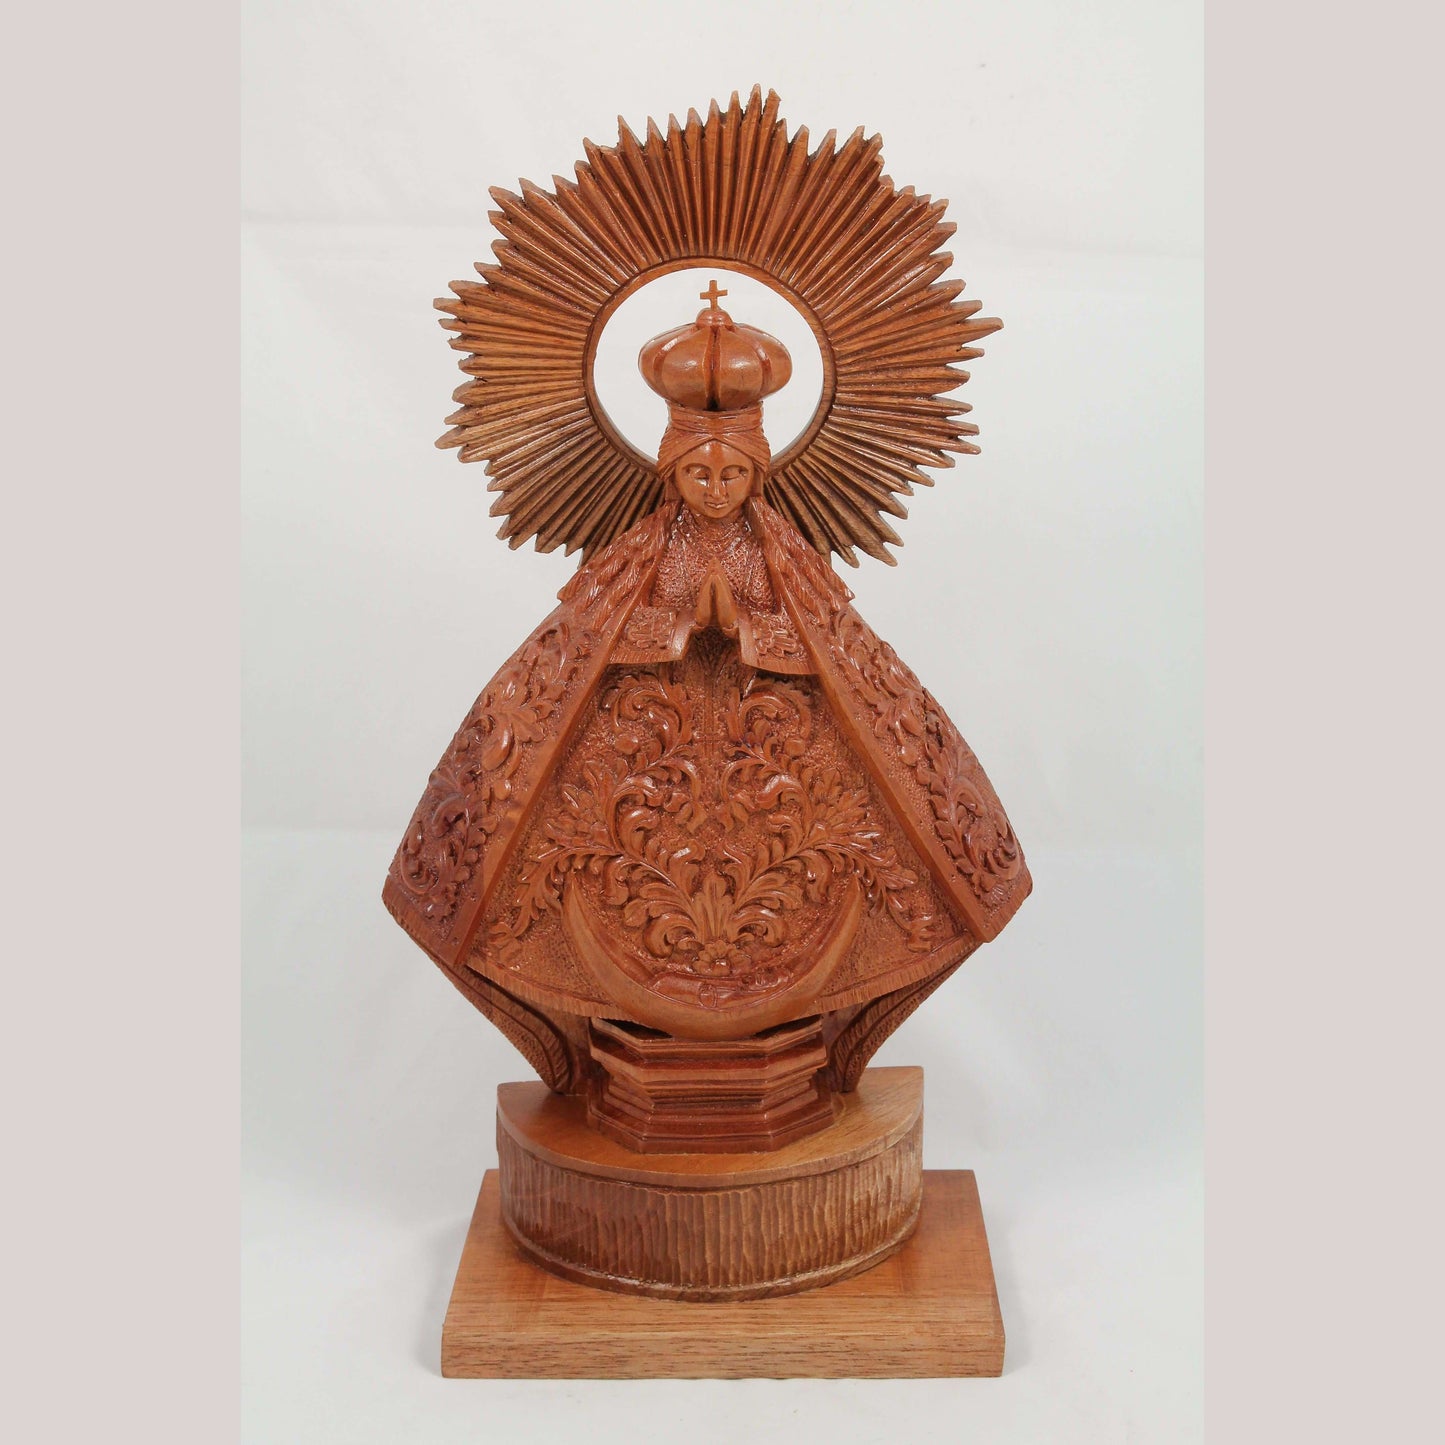 Lg Wood Madonna/Virgin Mary Hand Made Tooled/Carved Mexico Folk Art Religious #1